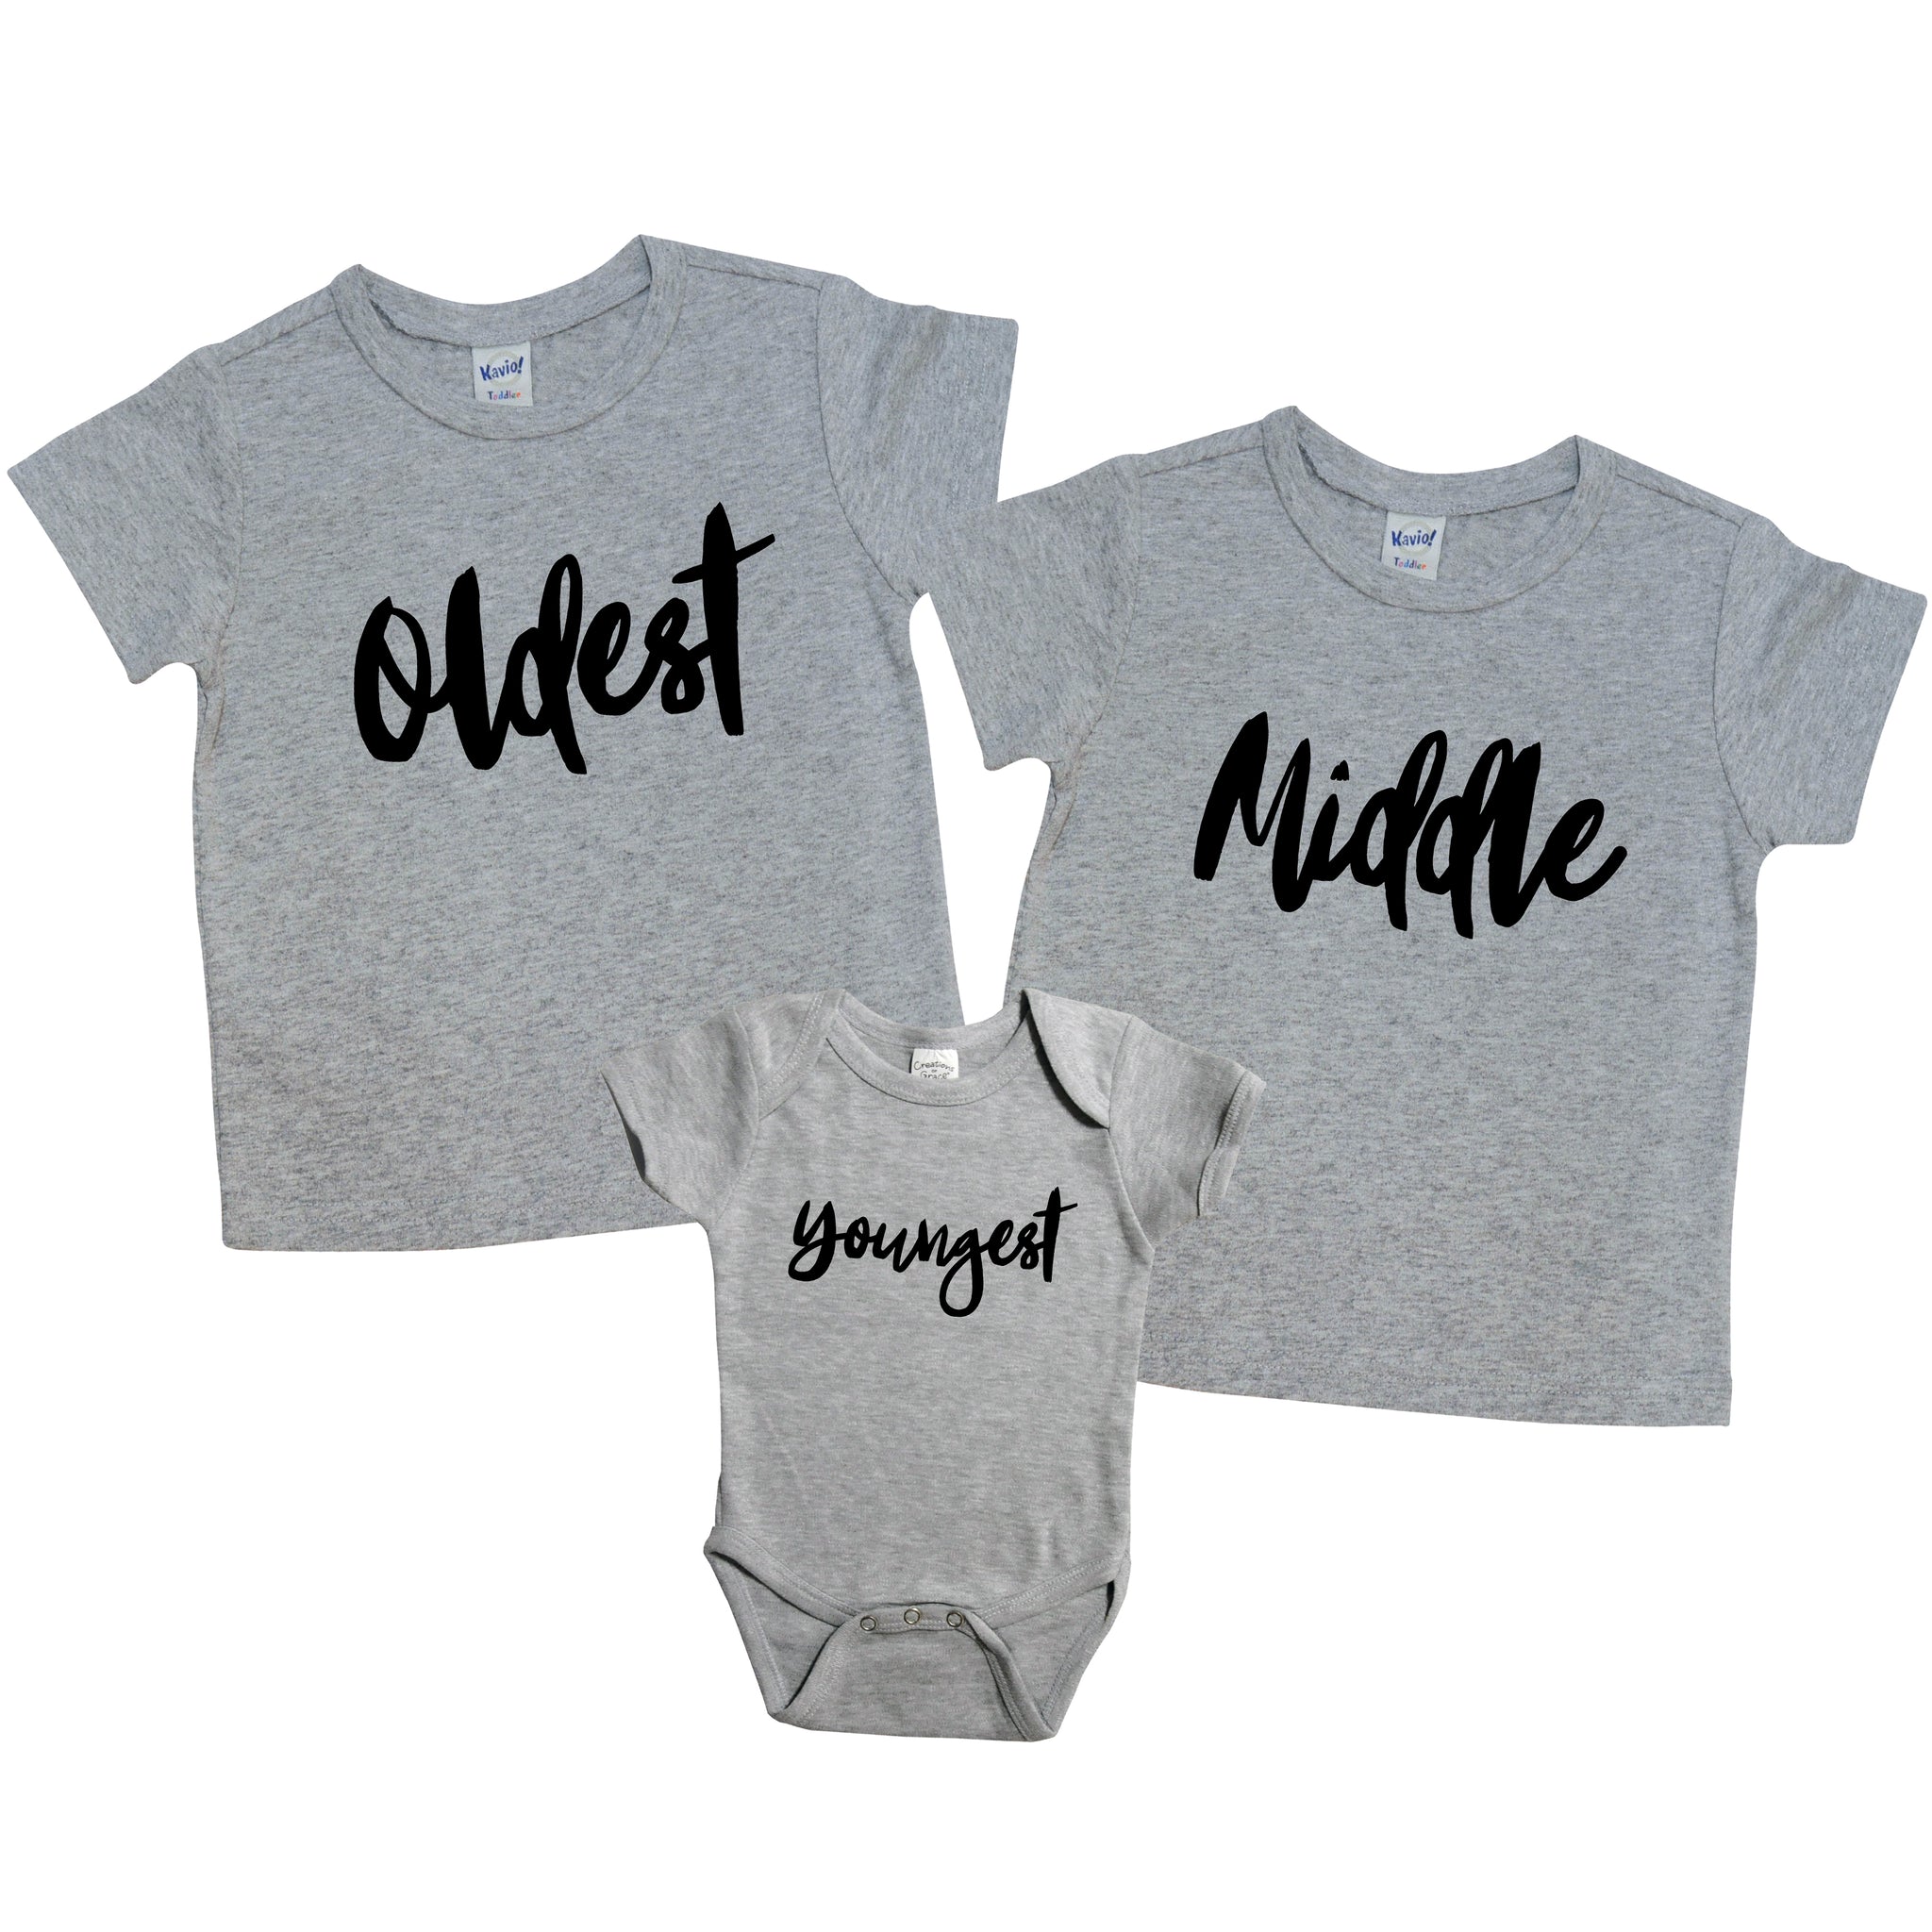 Oldest, Middle, and Youngest Shirt Set | Grey Short Sleeve Shirts and Grey Onesie | Boys, Girls, Pregnancy Announcement, Siblings | 450